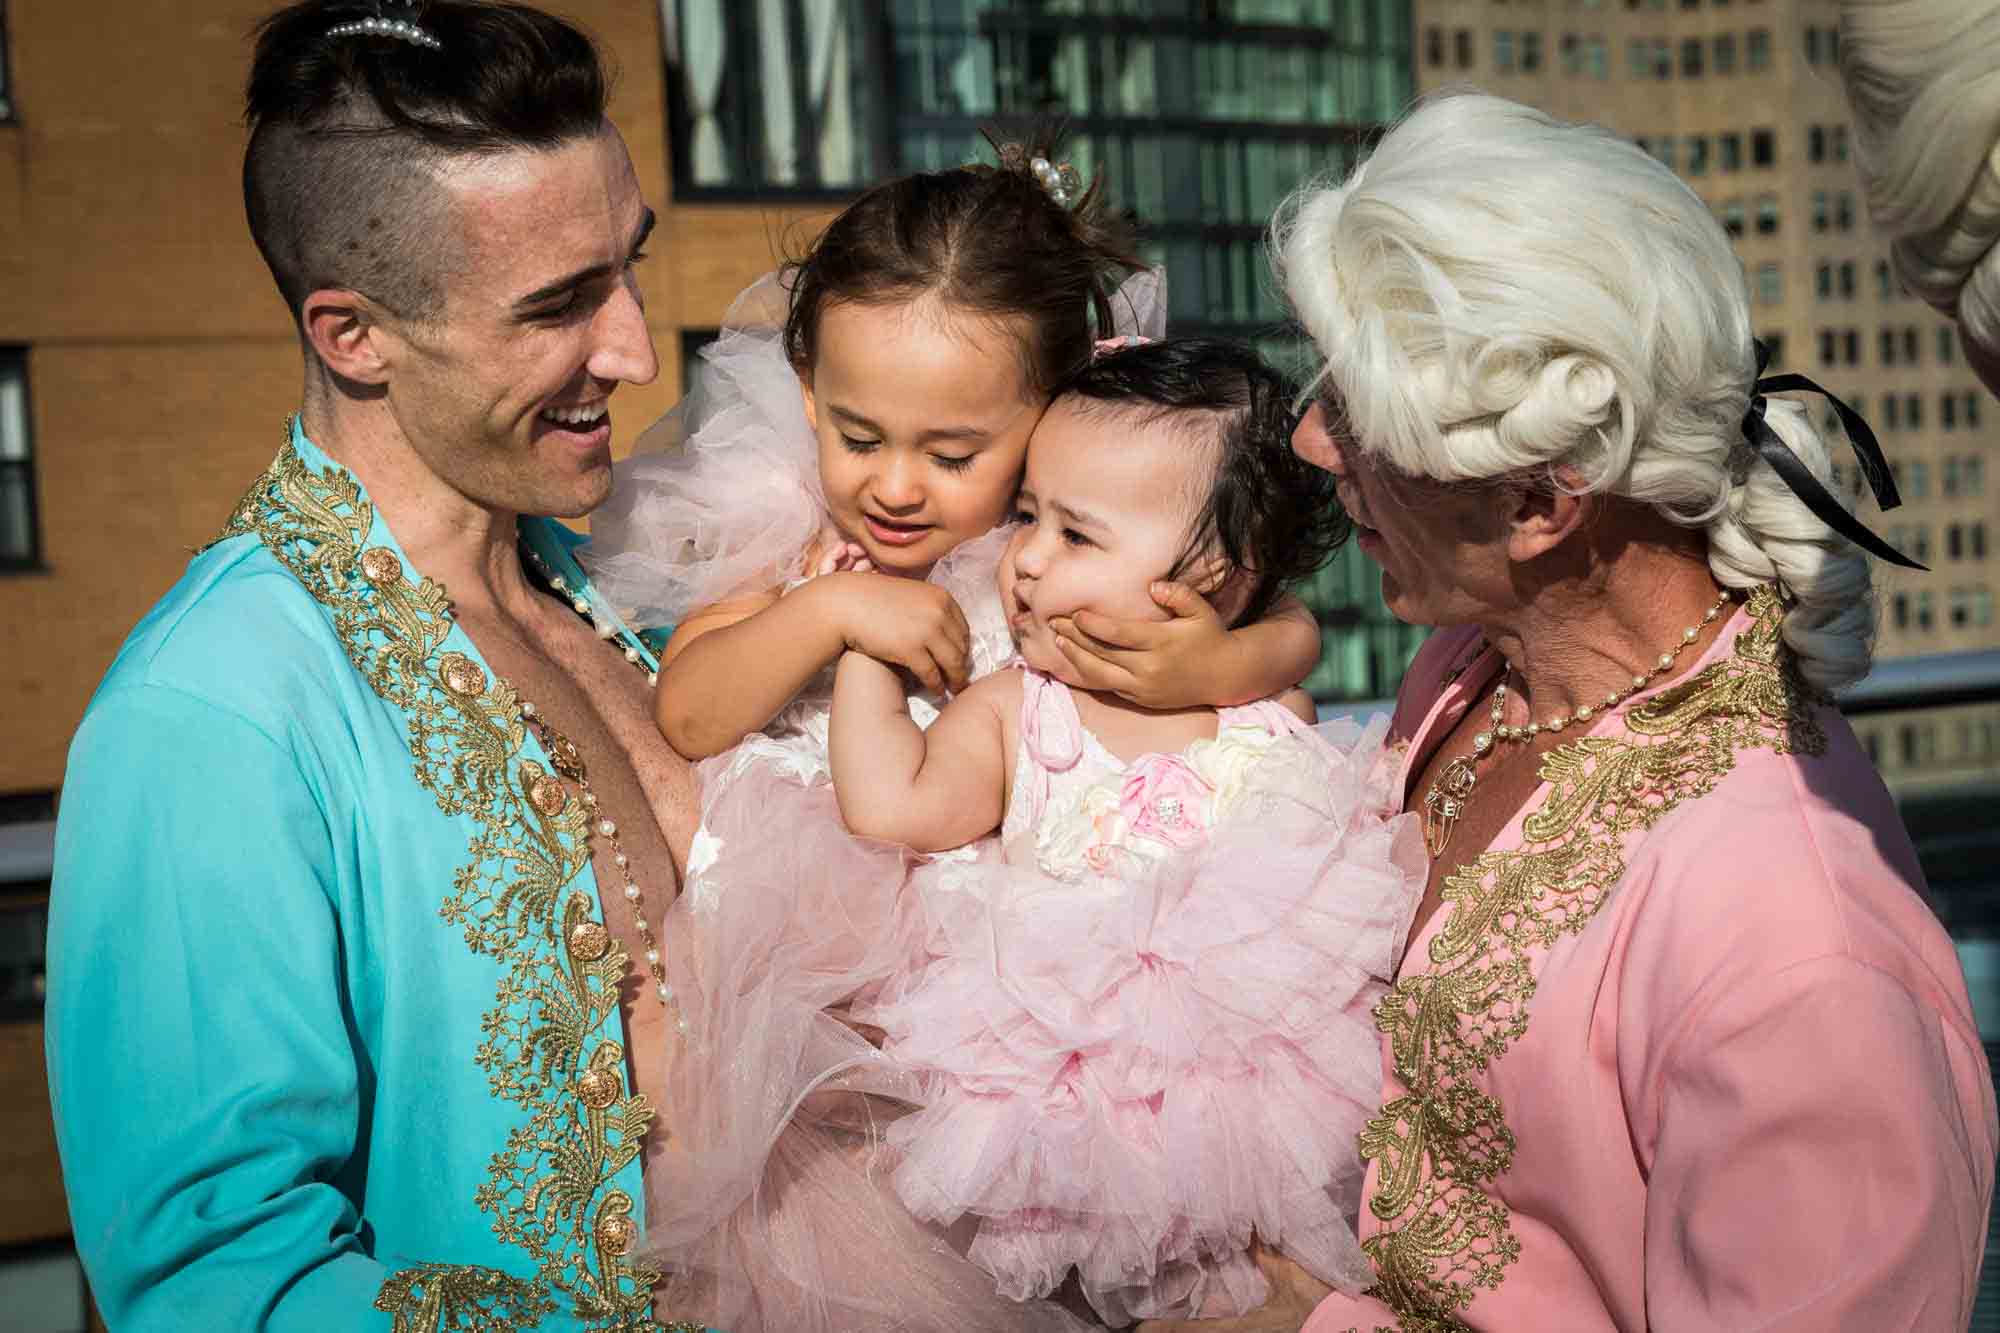 Two men dressed as French courtiers holding two little girls wearing pink dresses for an article on event planning photography tips